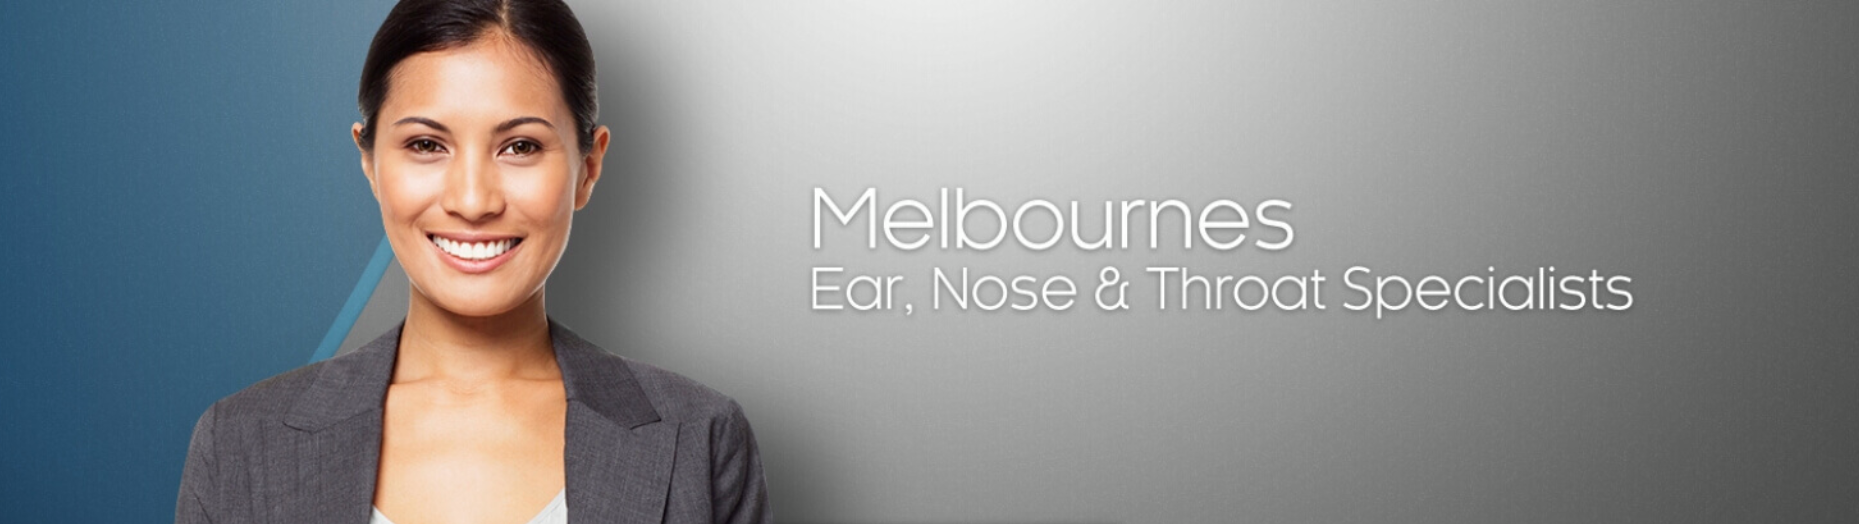 Melbourne's Ear,Nose & Throat Specialists